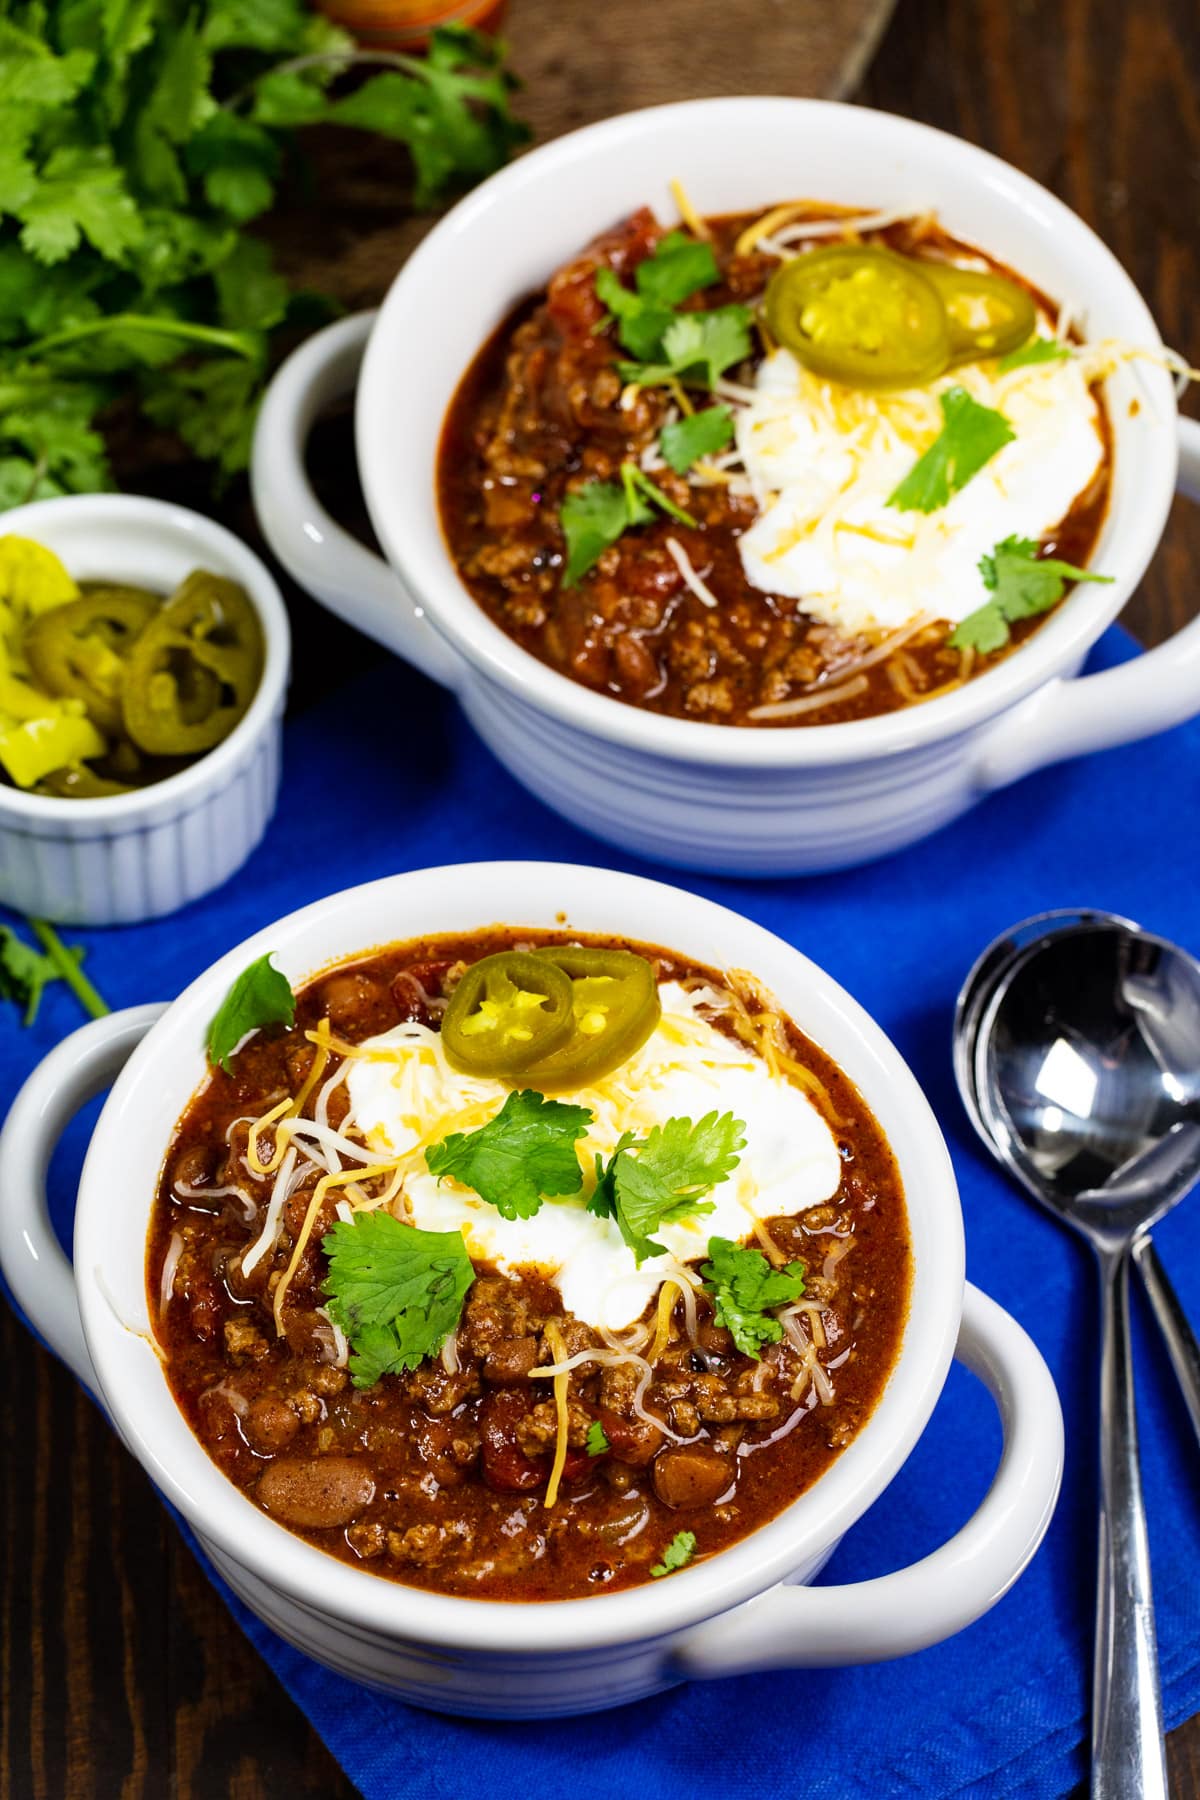 Rotel Chili in soup bowls.